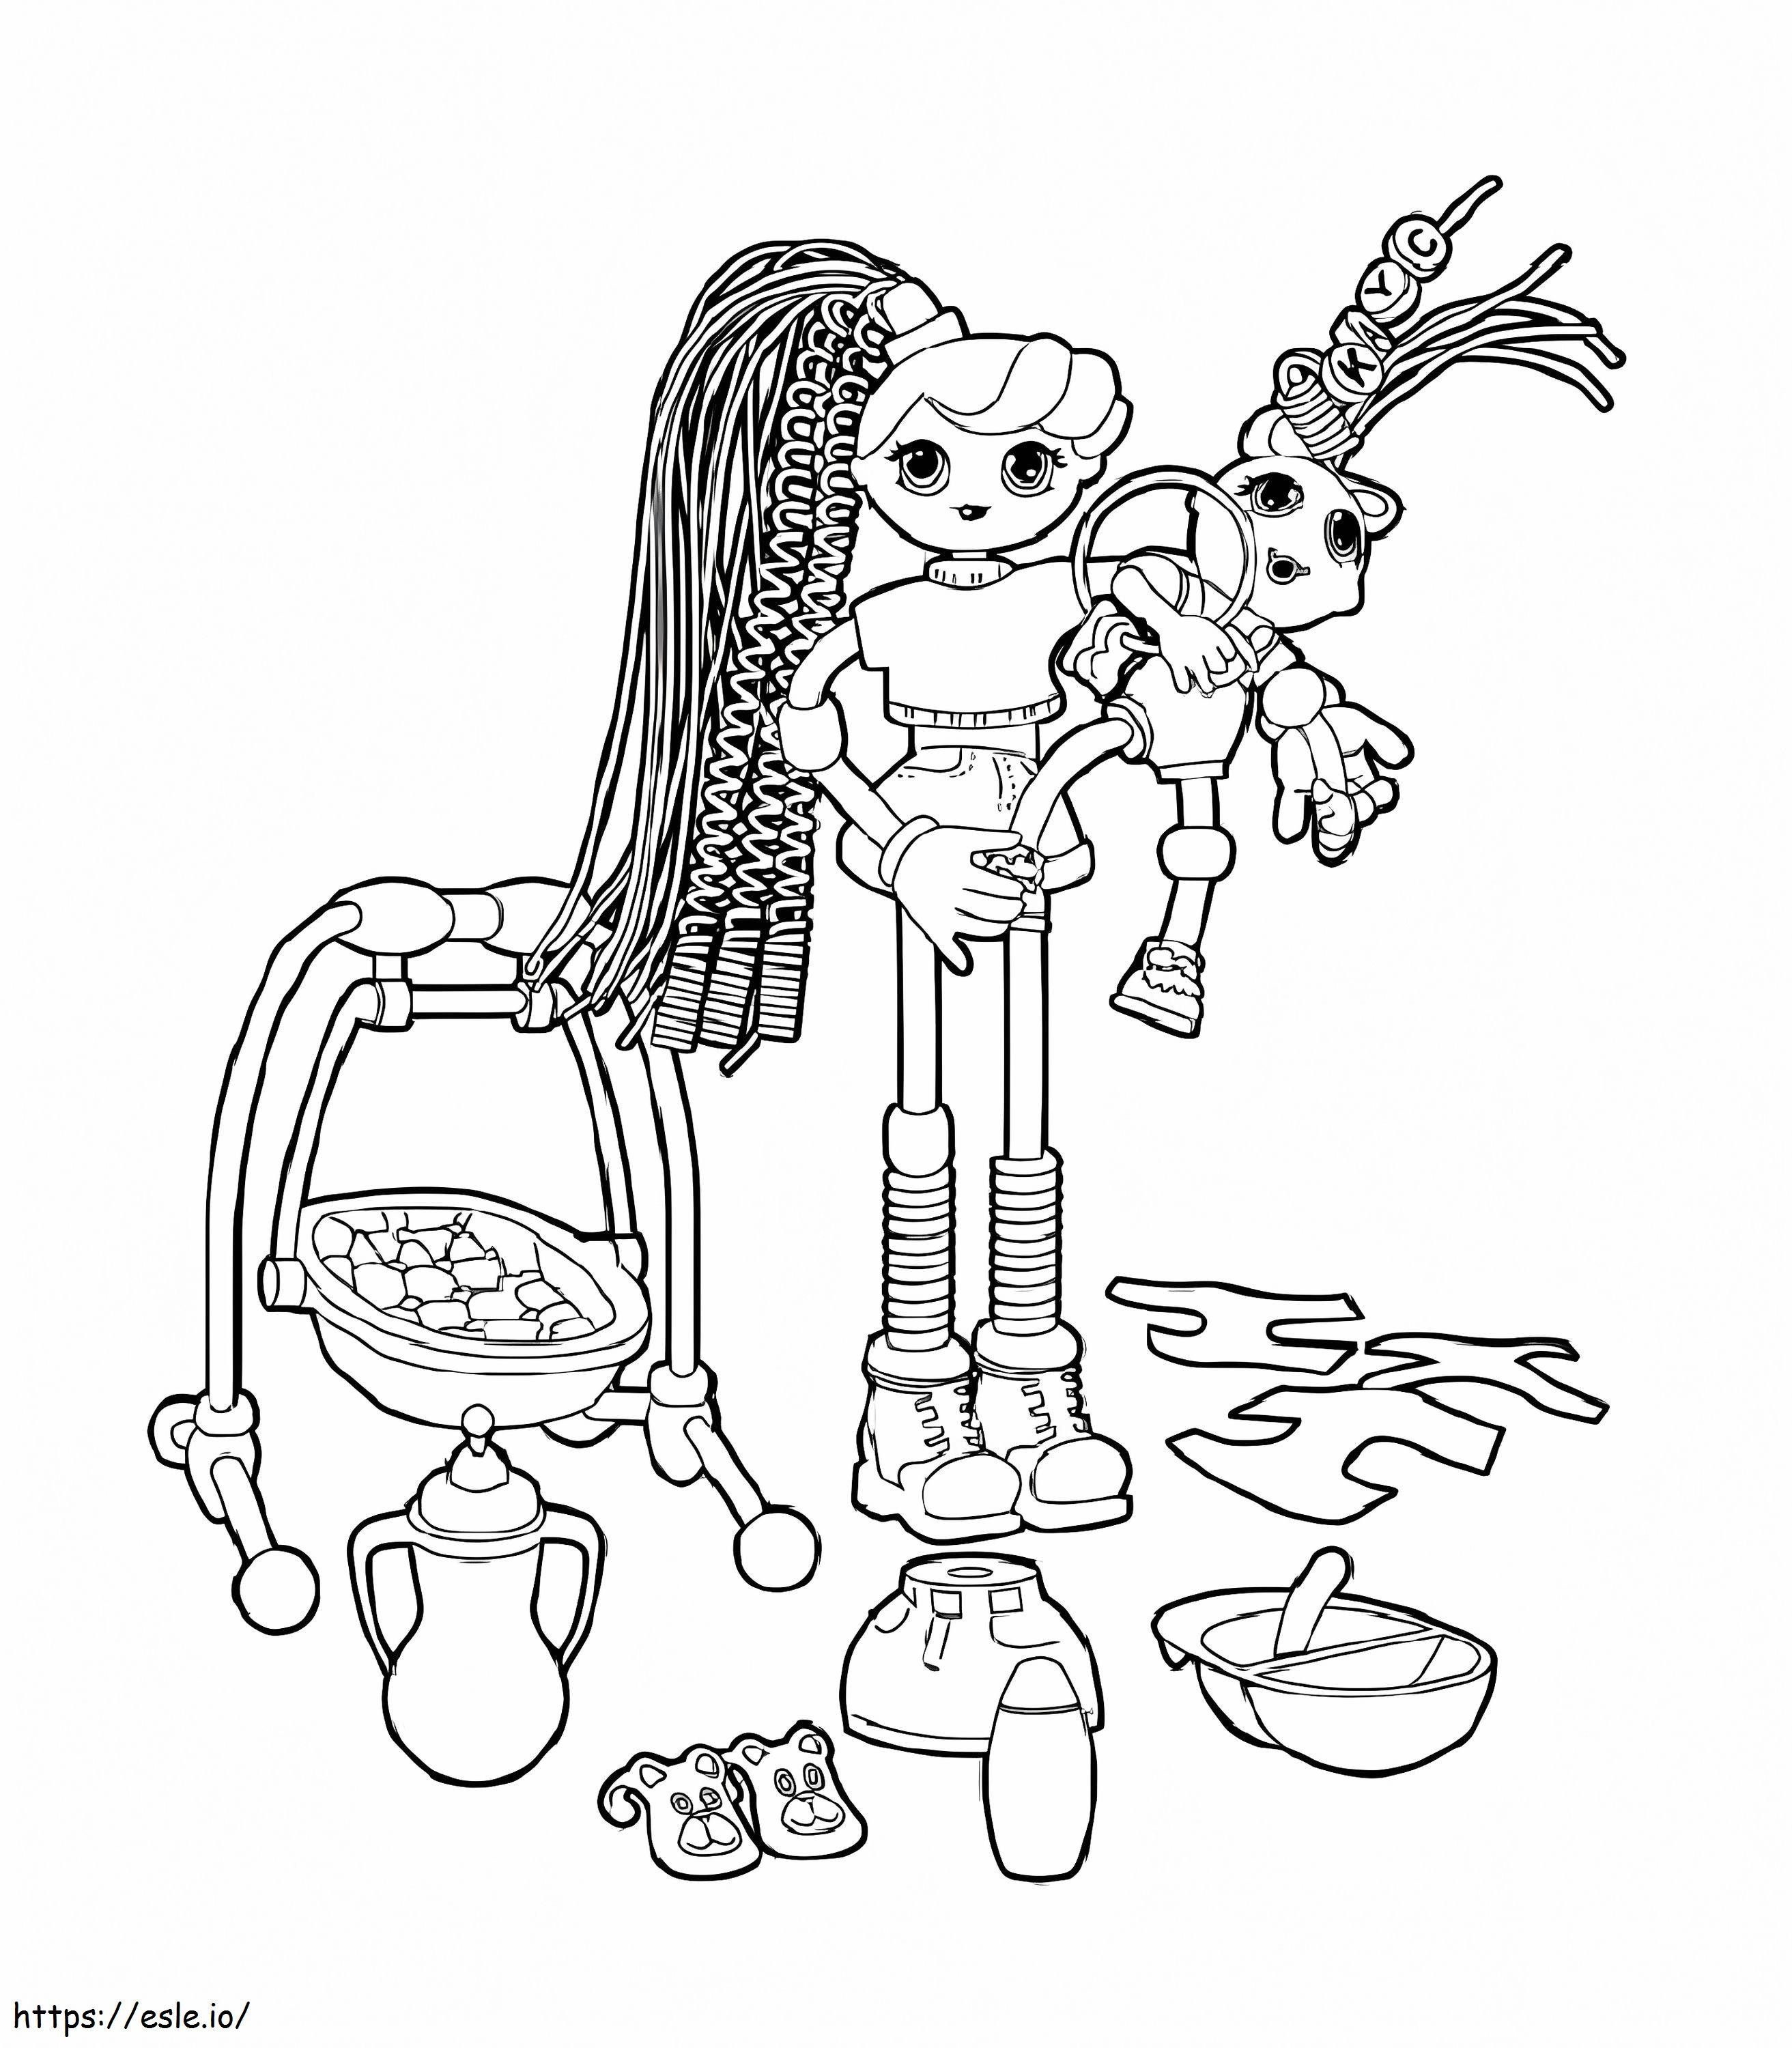 Betty Spaghetty 6 coloring page